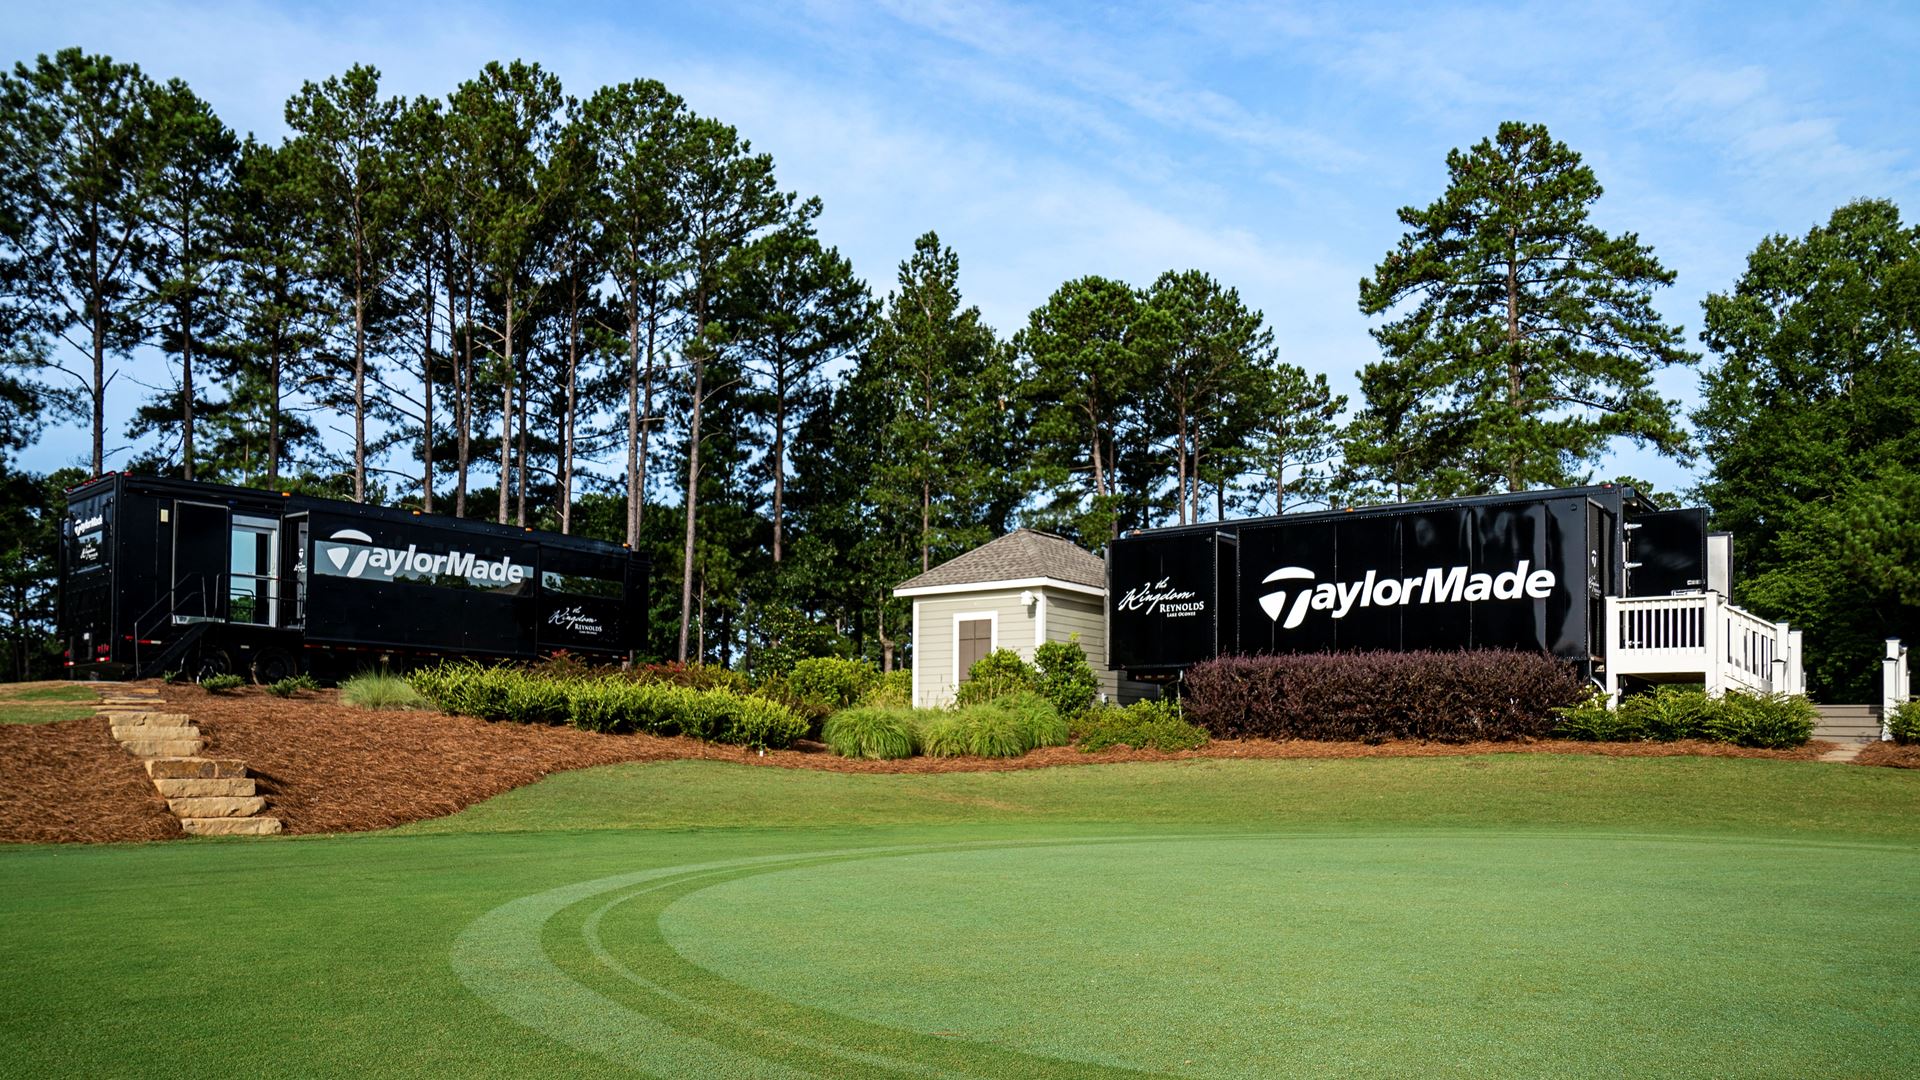 The Kingdom at Reynolds Lake Oconee Gets New Name and New TaylorMade Wheels